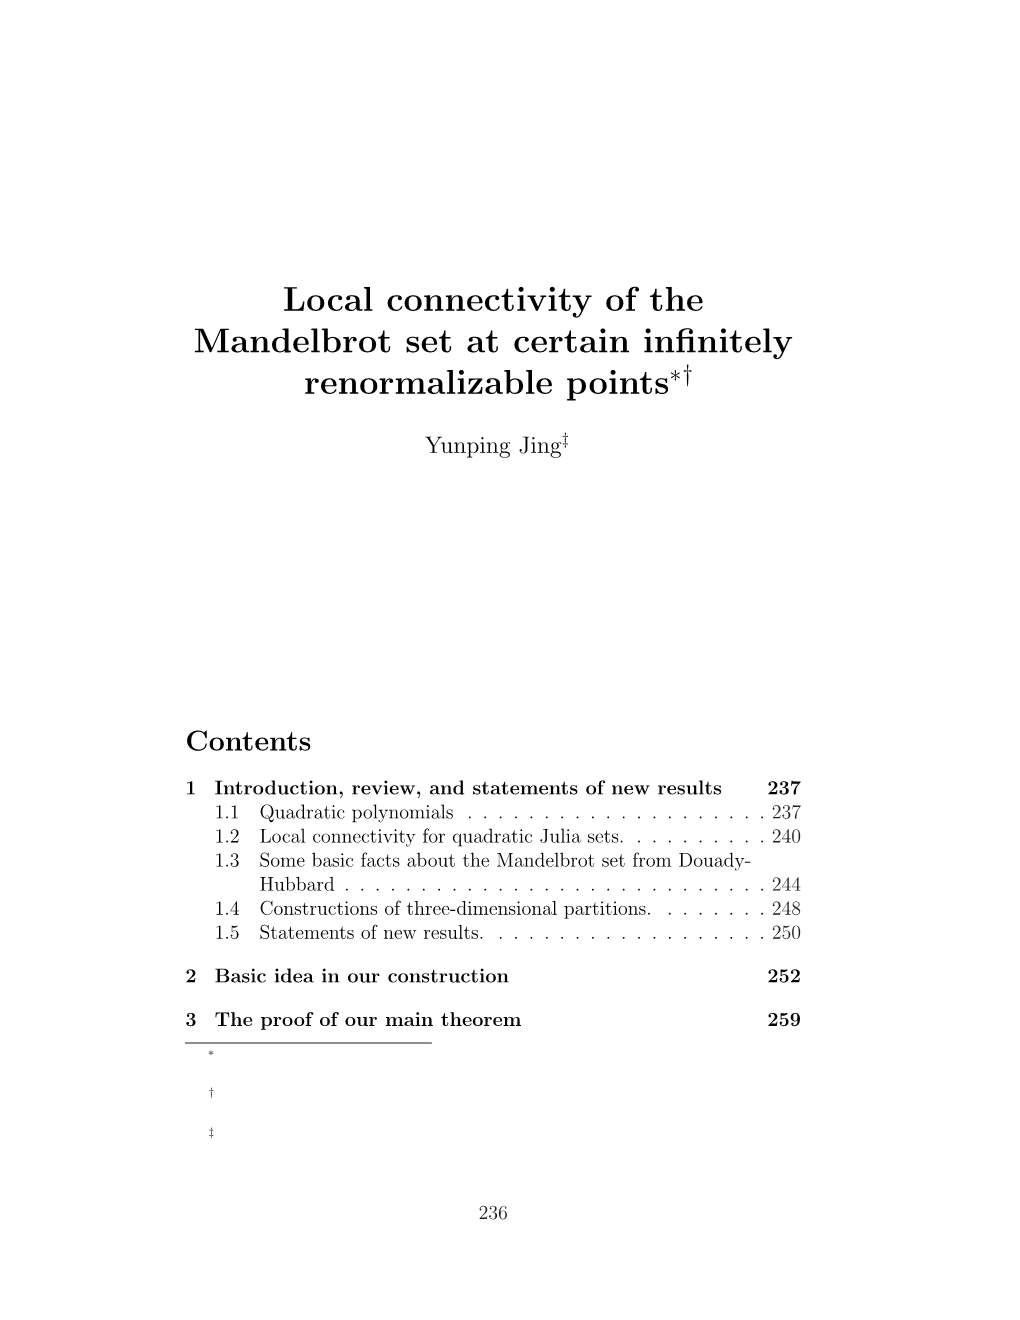 Local Connectivity of the Mandelbrot Set at Certain Inﬁnitely Renormalizable Points∗†